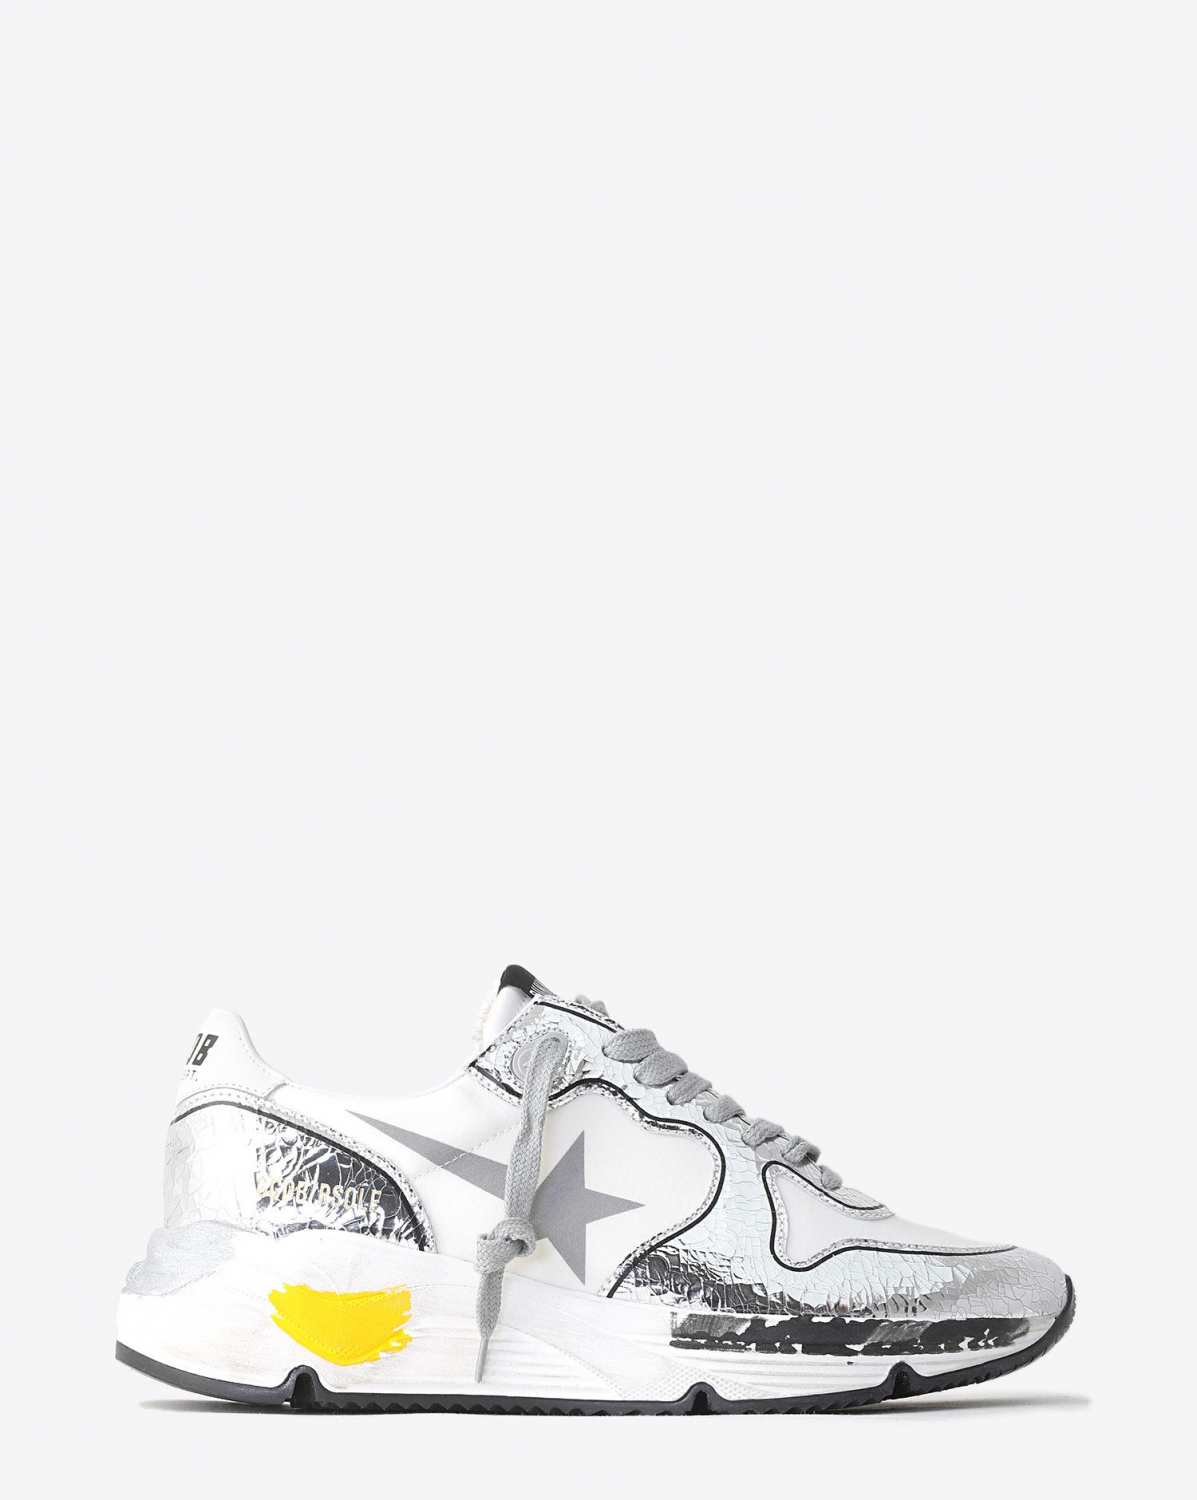 Sneakers Golden Goose Woman Collection Sneakers Running Sole - White - Silver Crack